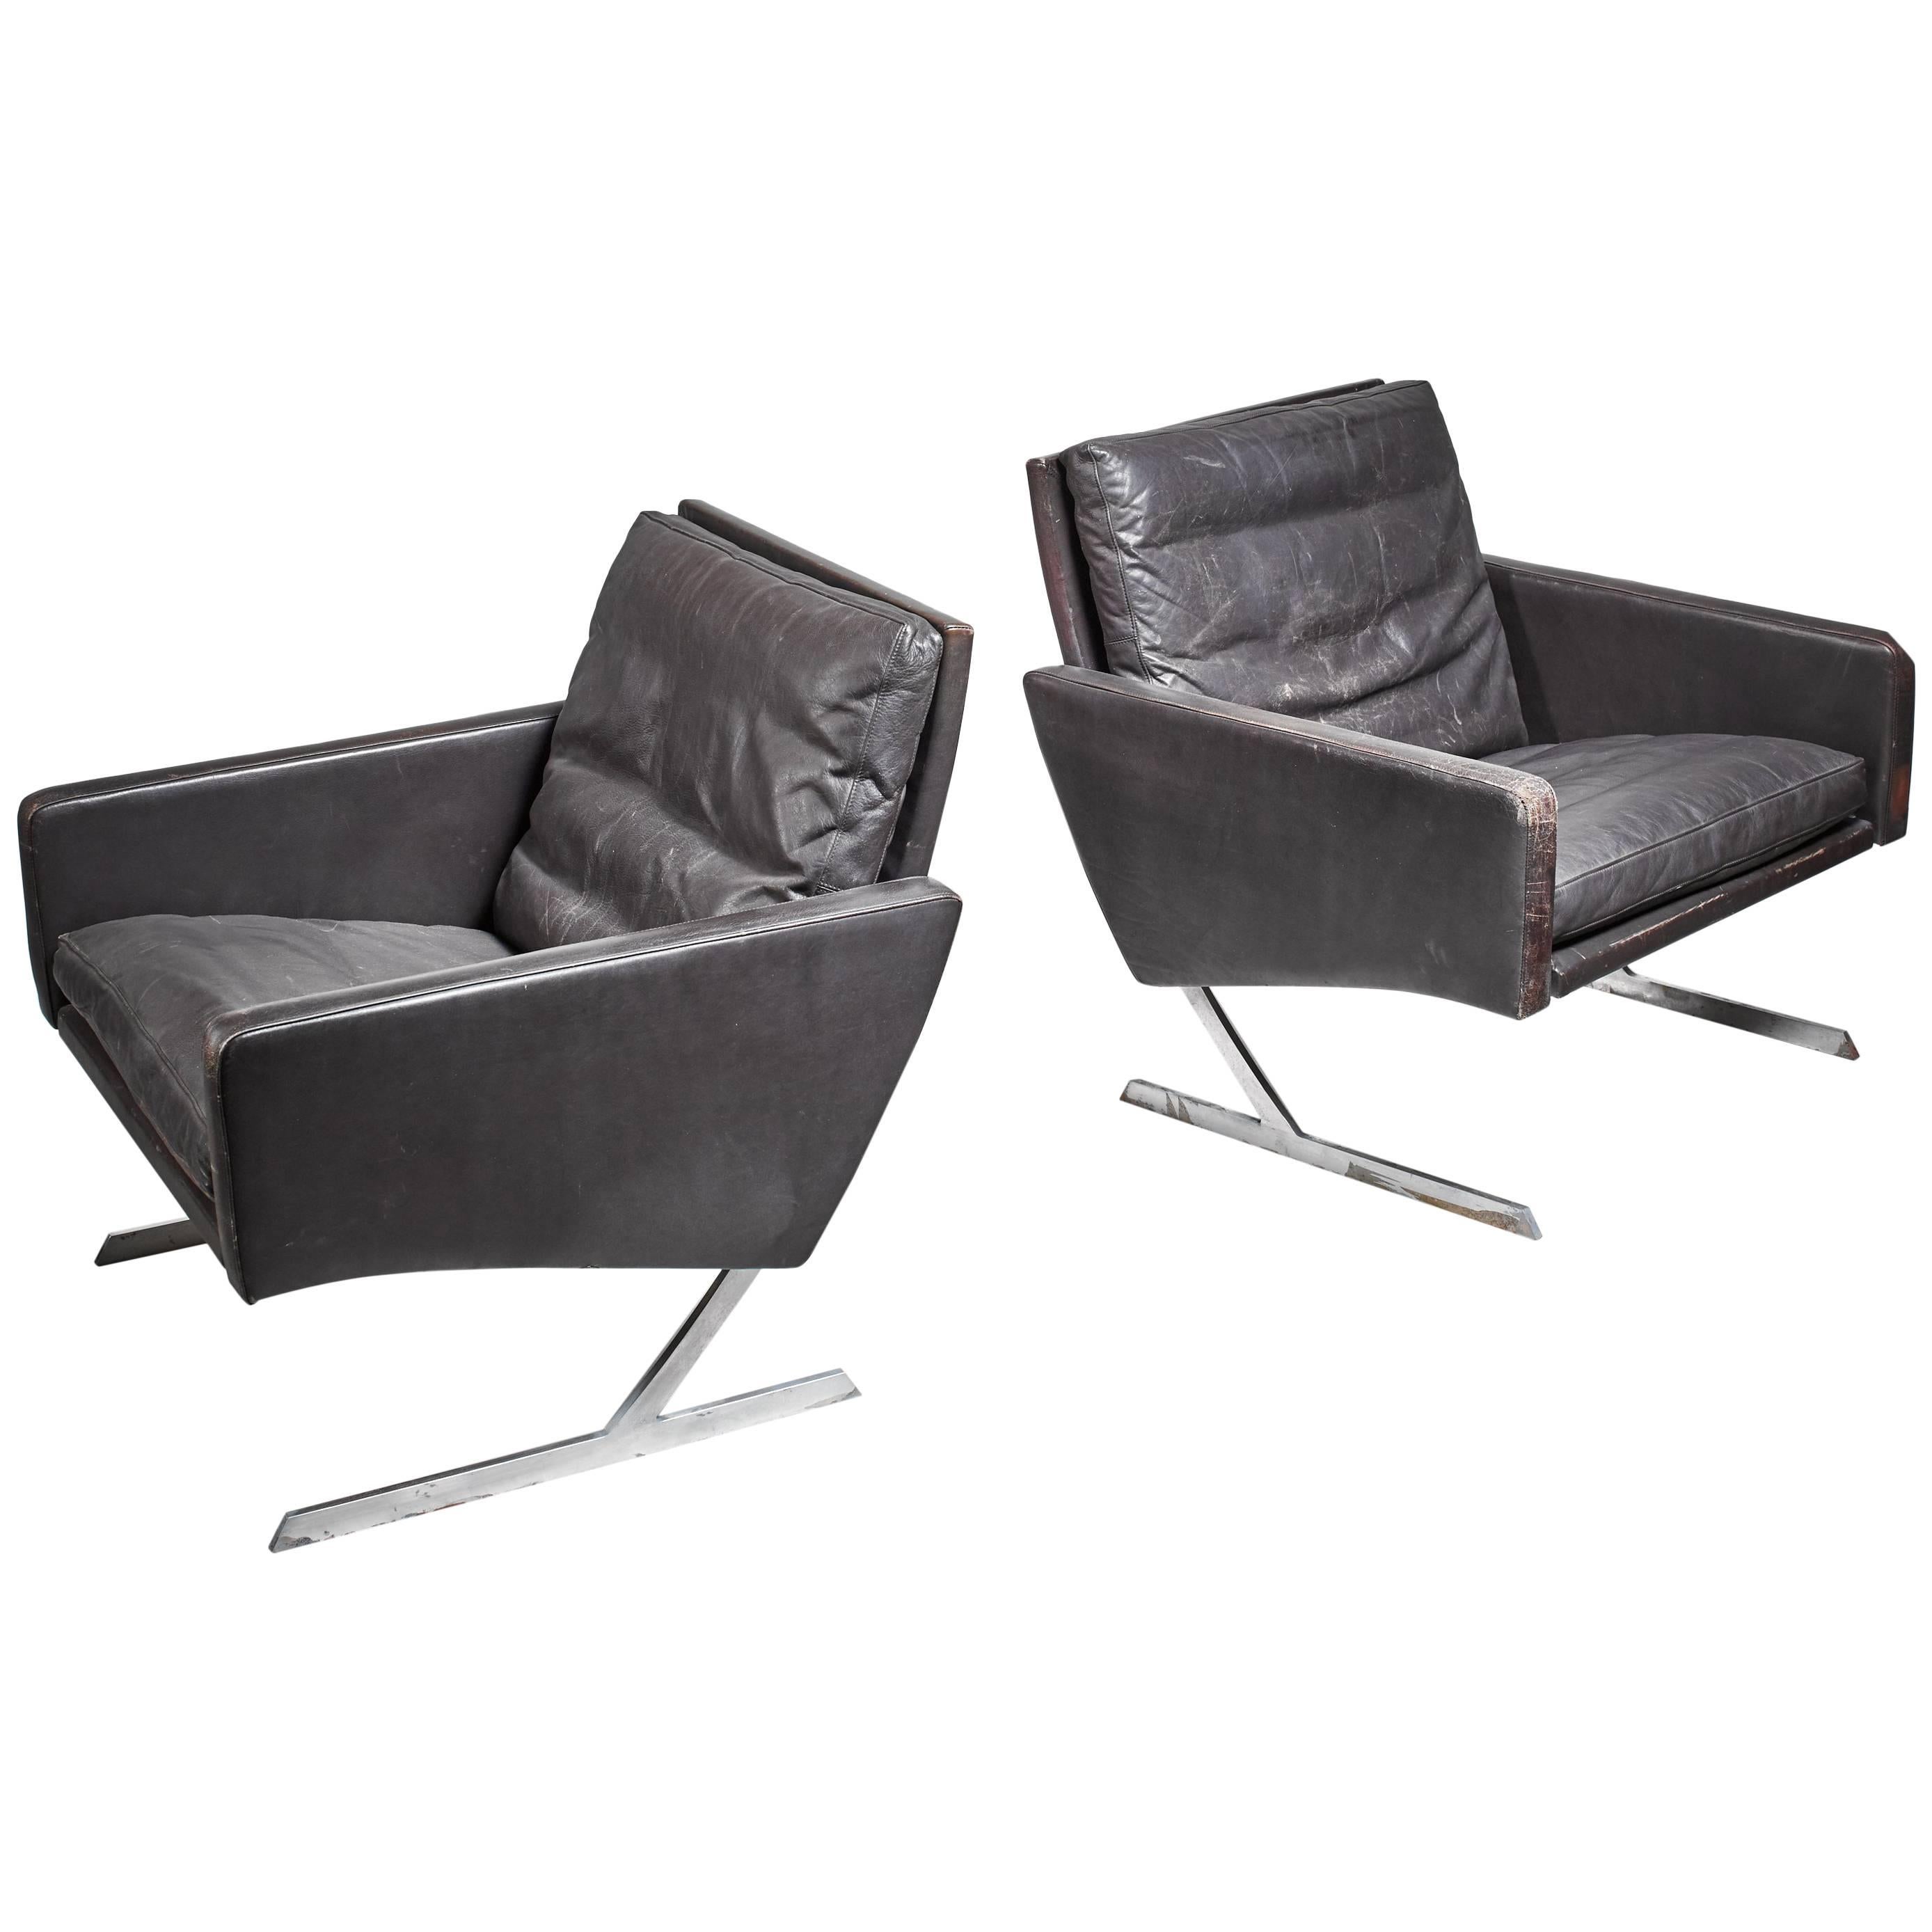 Preben Fabricius Pair of BO 701 Chairs in Dark Brown Leather, Germany, 1970 For Sale